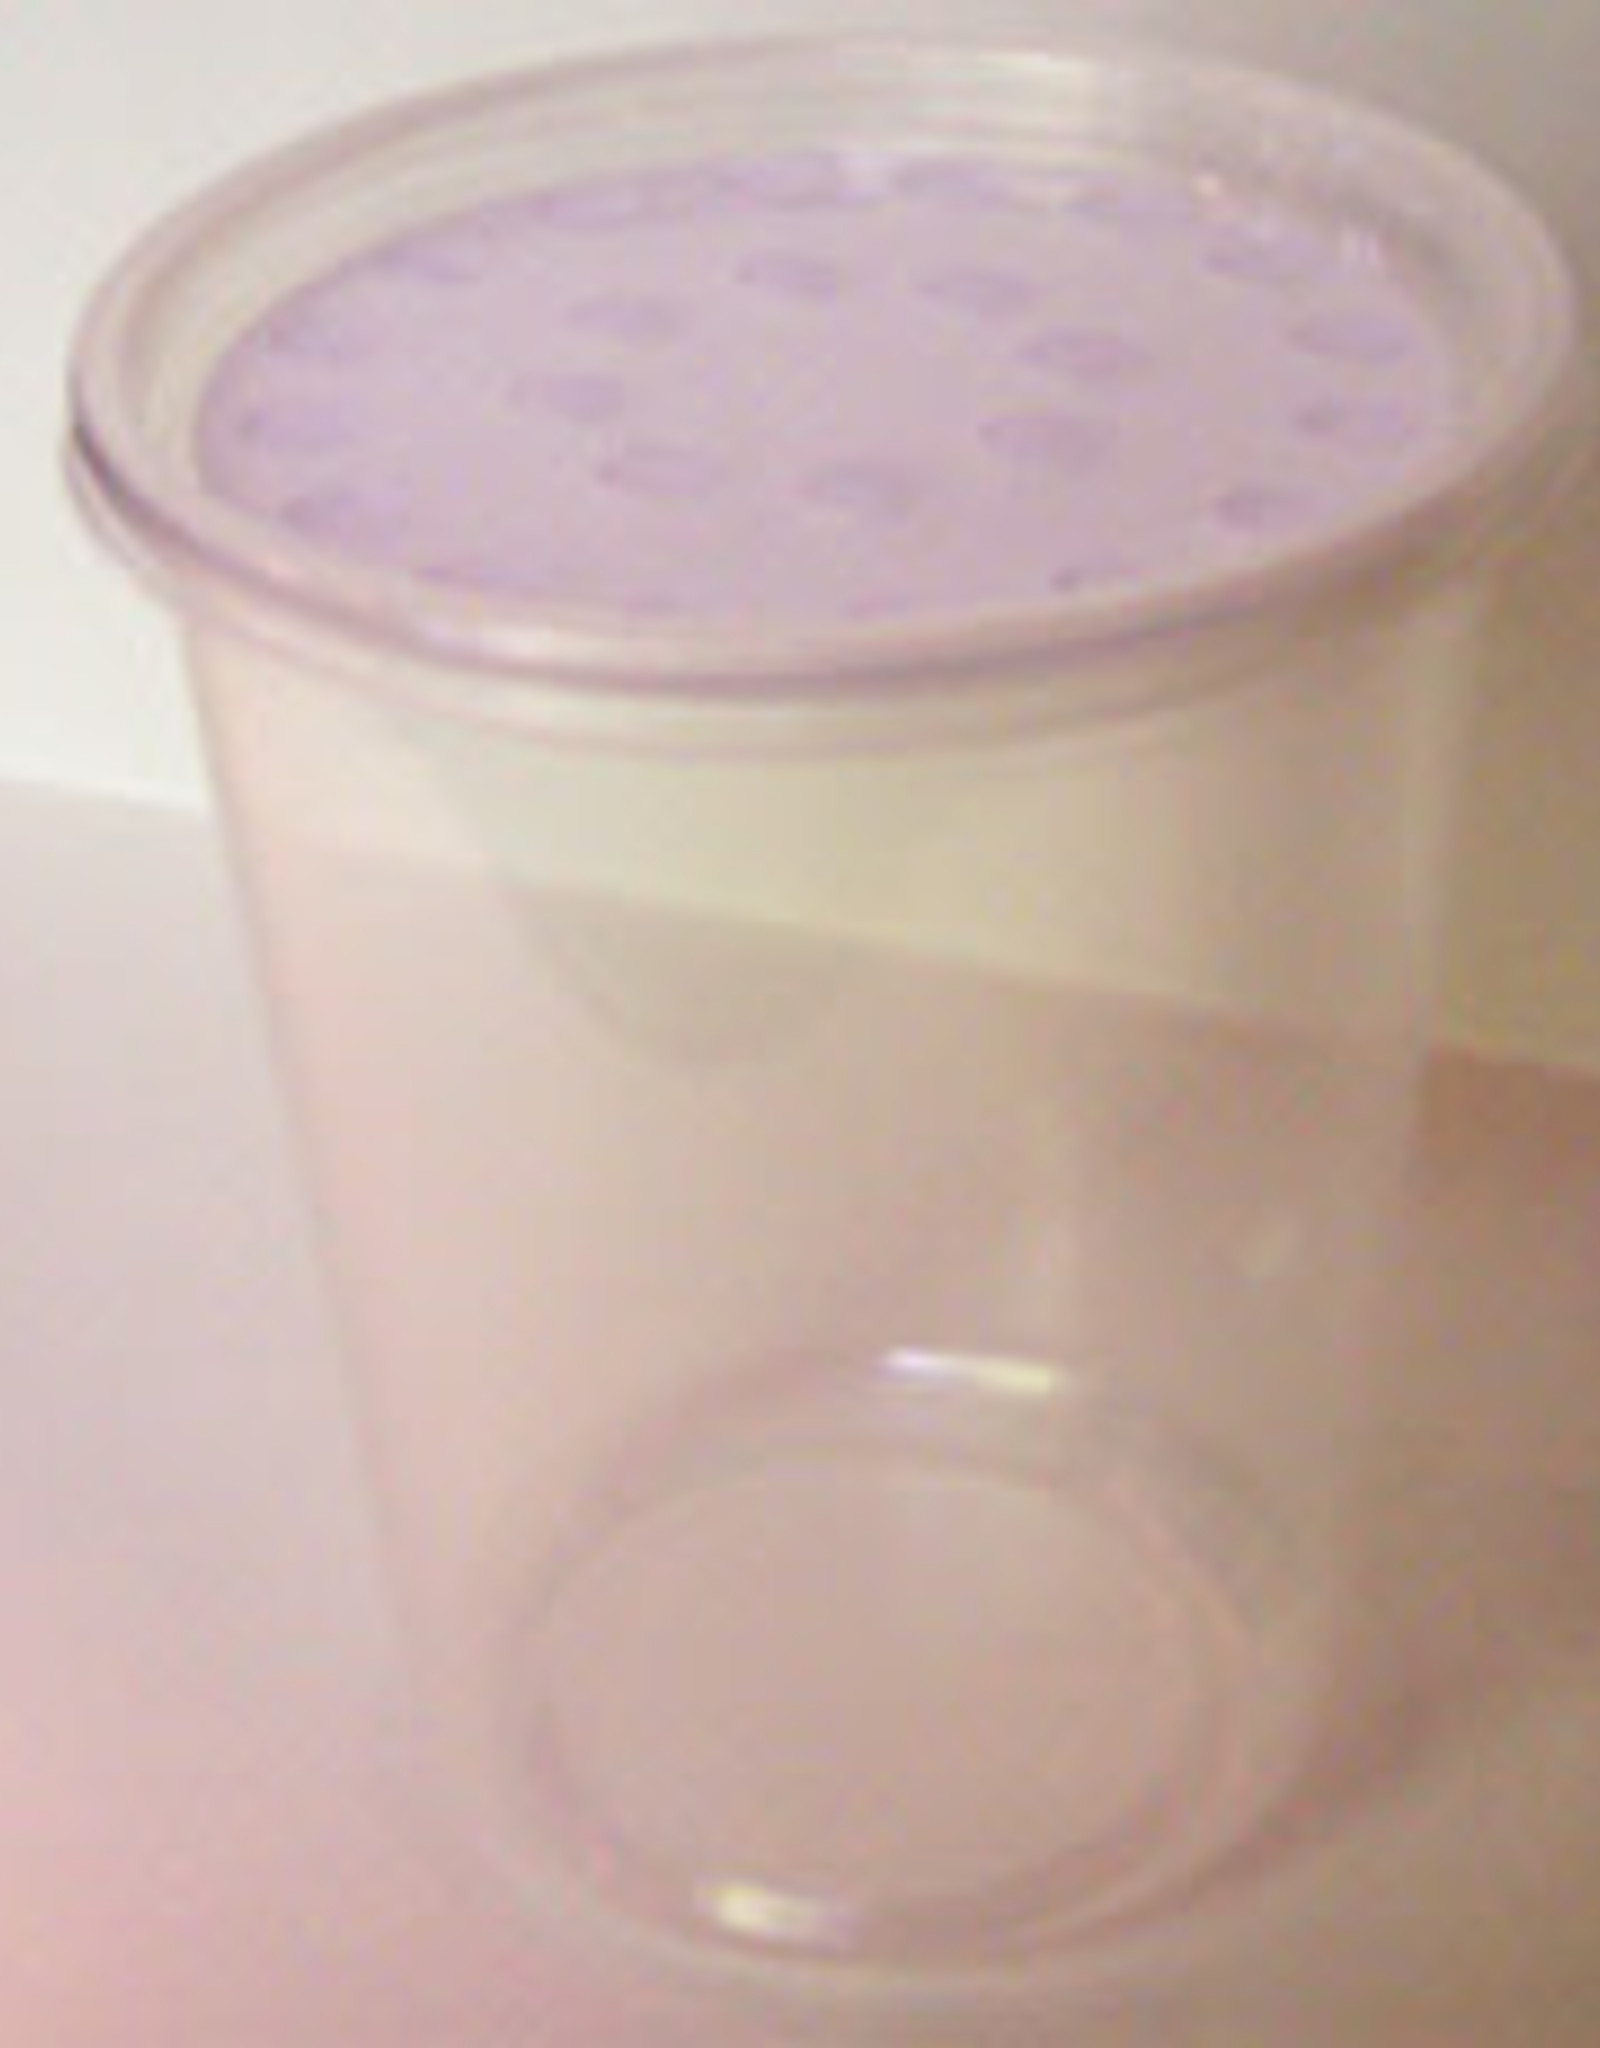 LIVE- FRUIT FLY- CUP W/CLOTH VENTED LID